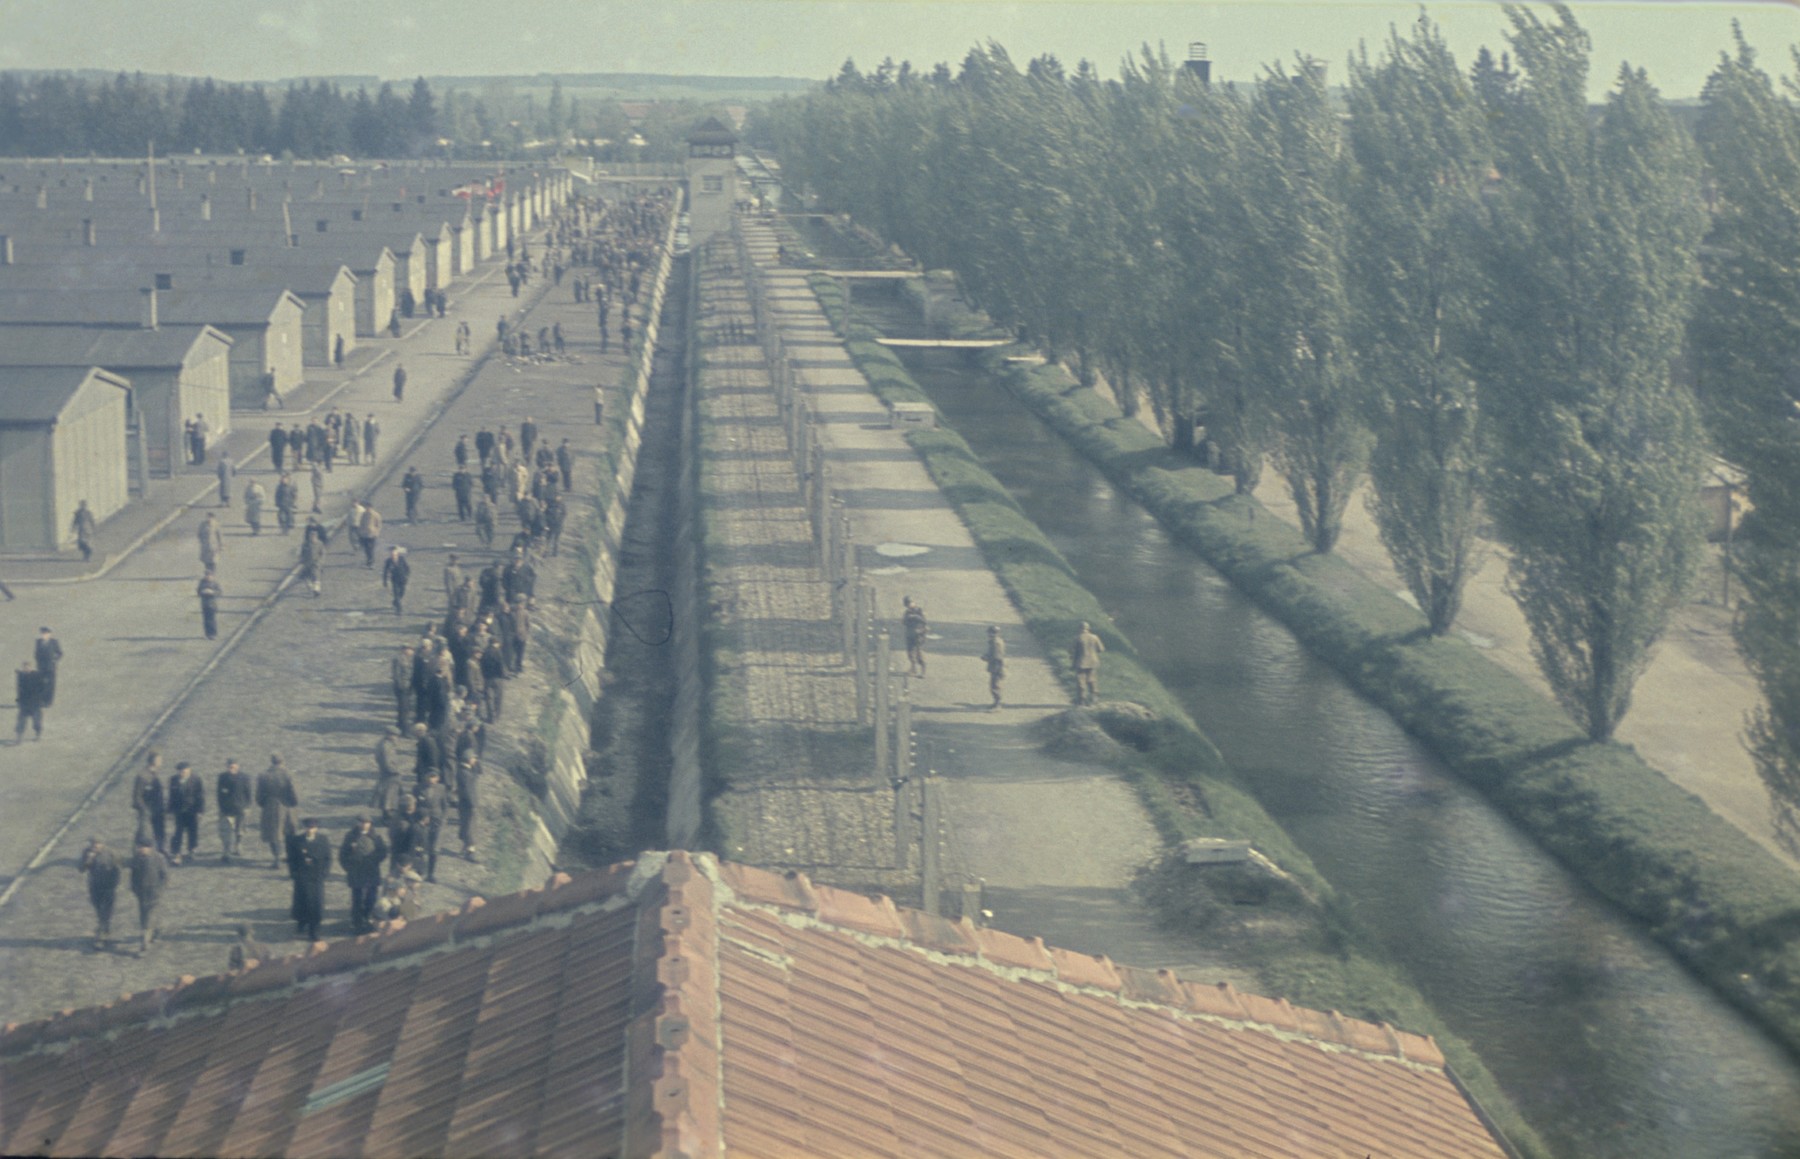 View from above of former prisoners walking along the main street of the newly liberated Dachau concentration camp parallel to the moats and barbed wire fence.